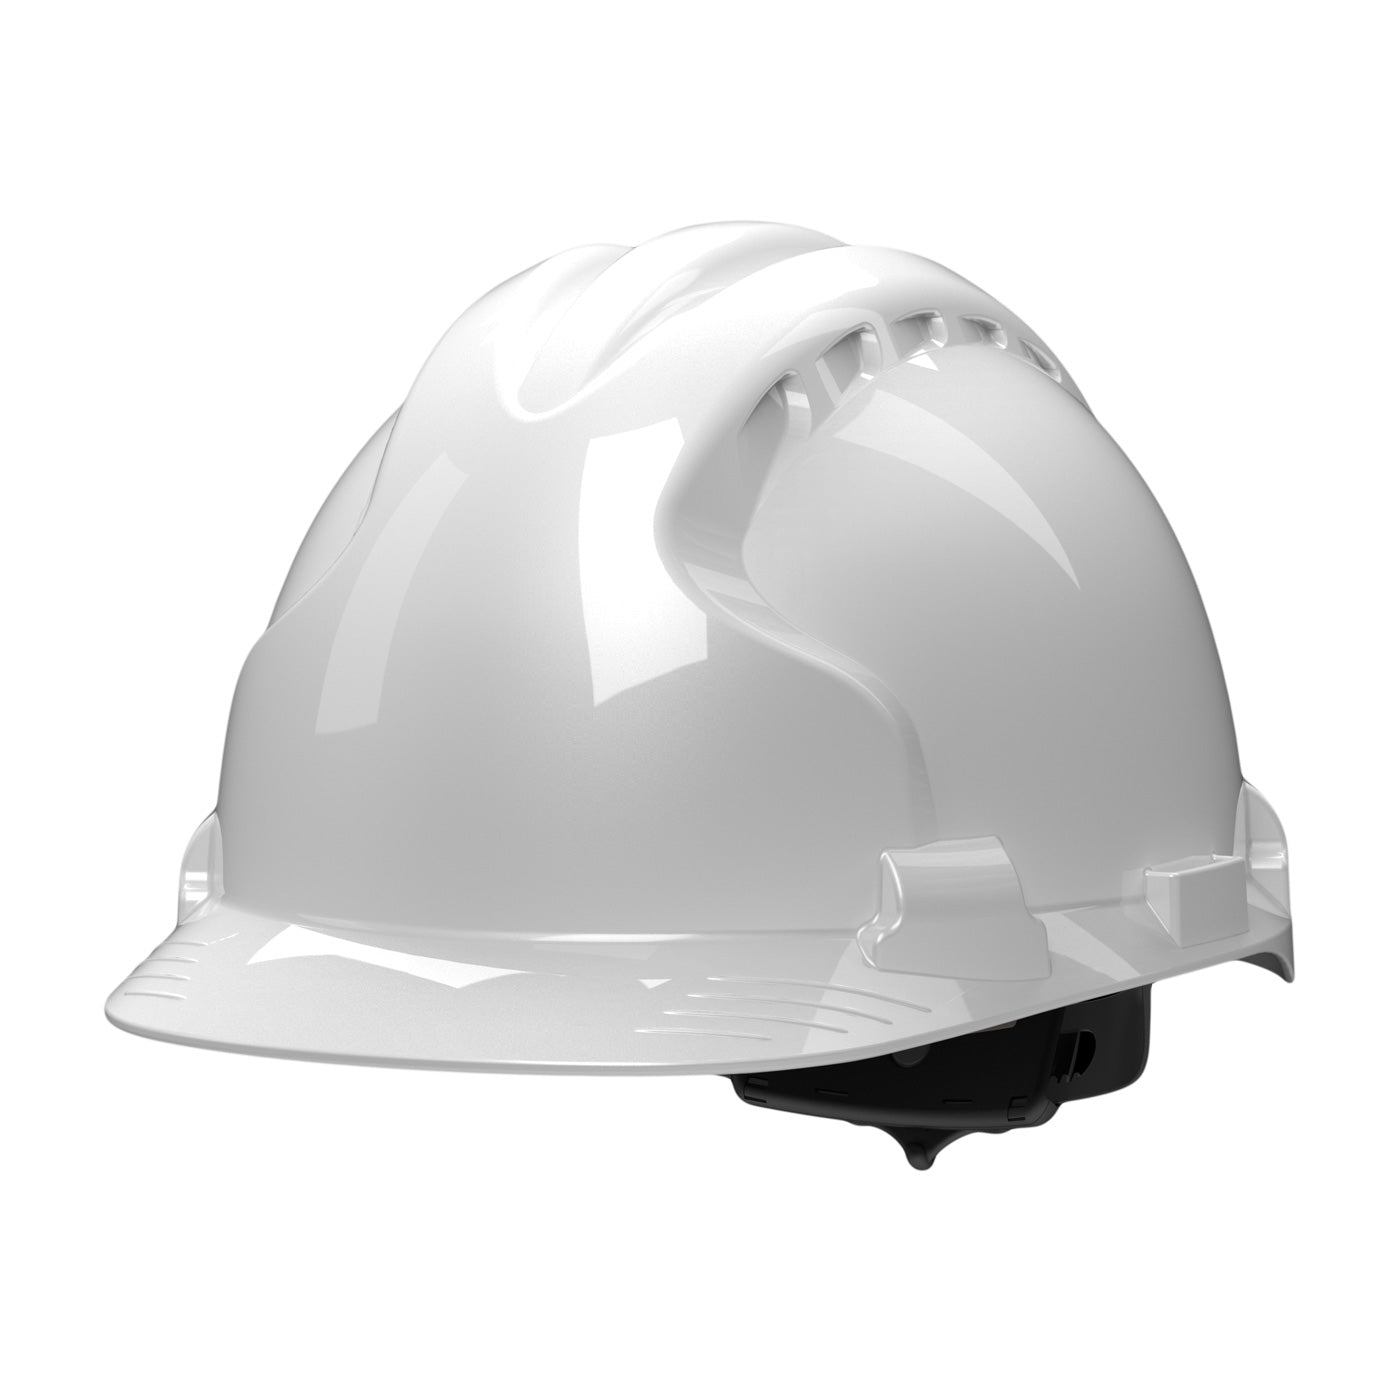 Protective Industrial Products-MK8 EVOLUTION® CAP STYLE HARD HAT (NON VENTED)-eSafety Supplies, Inc